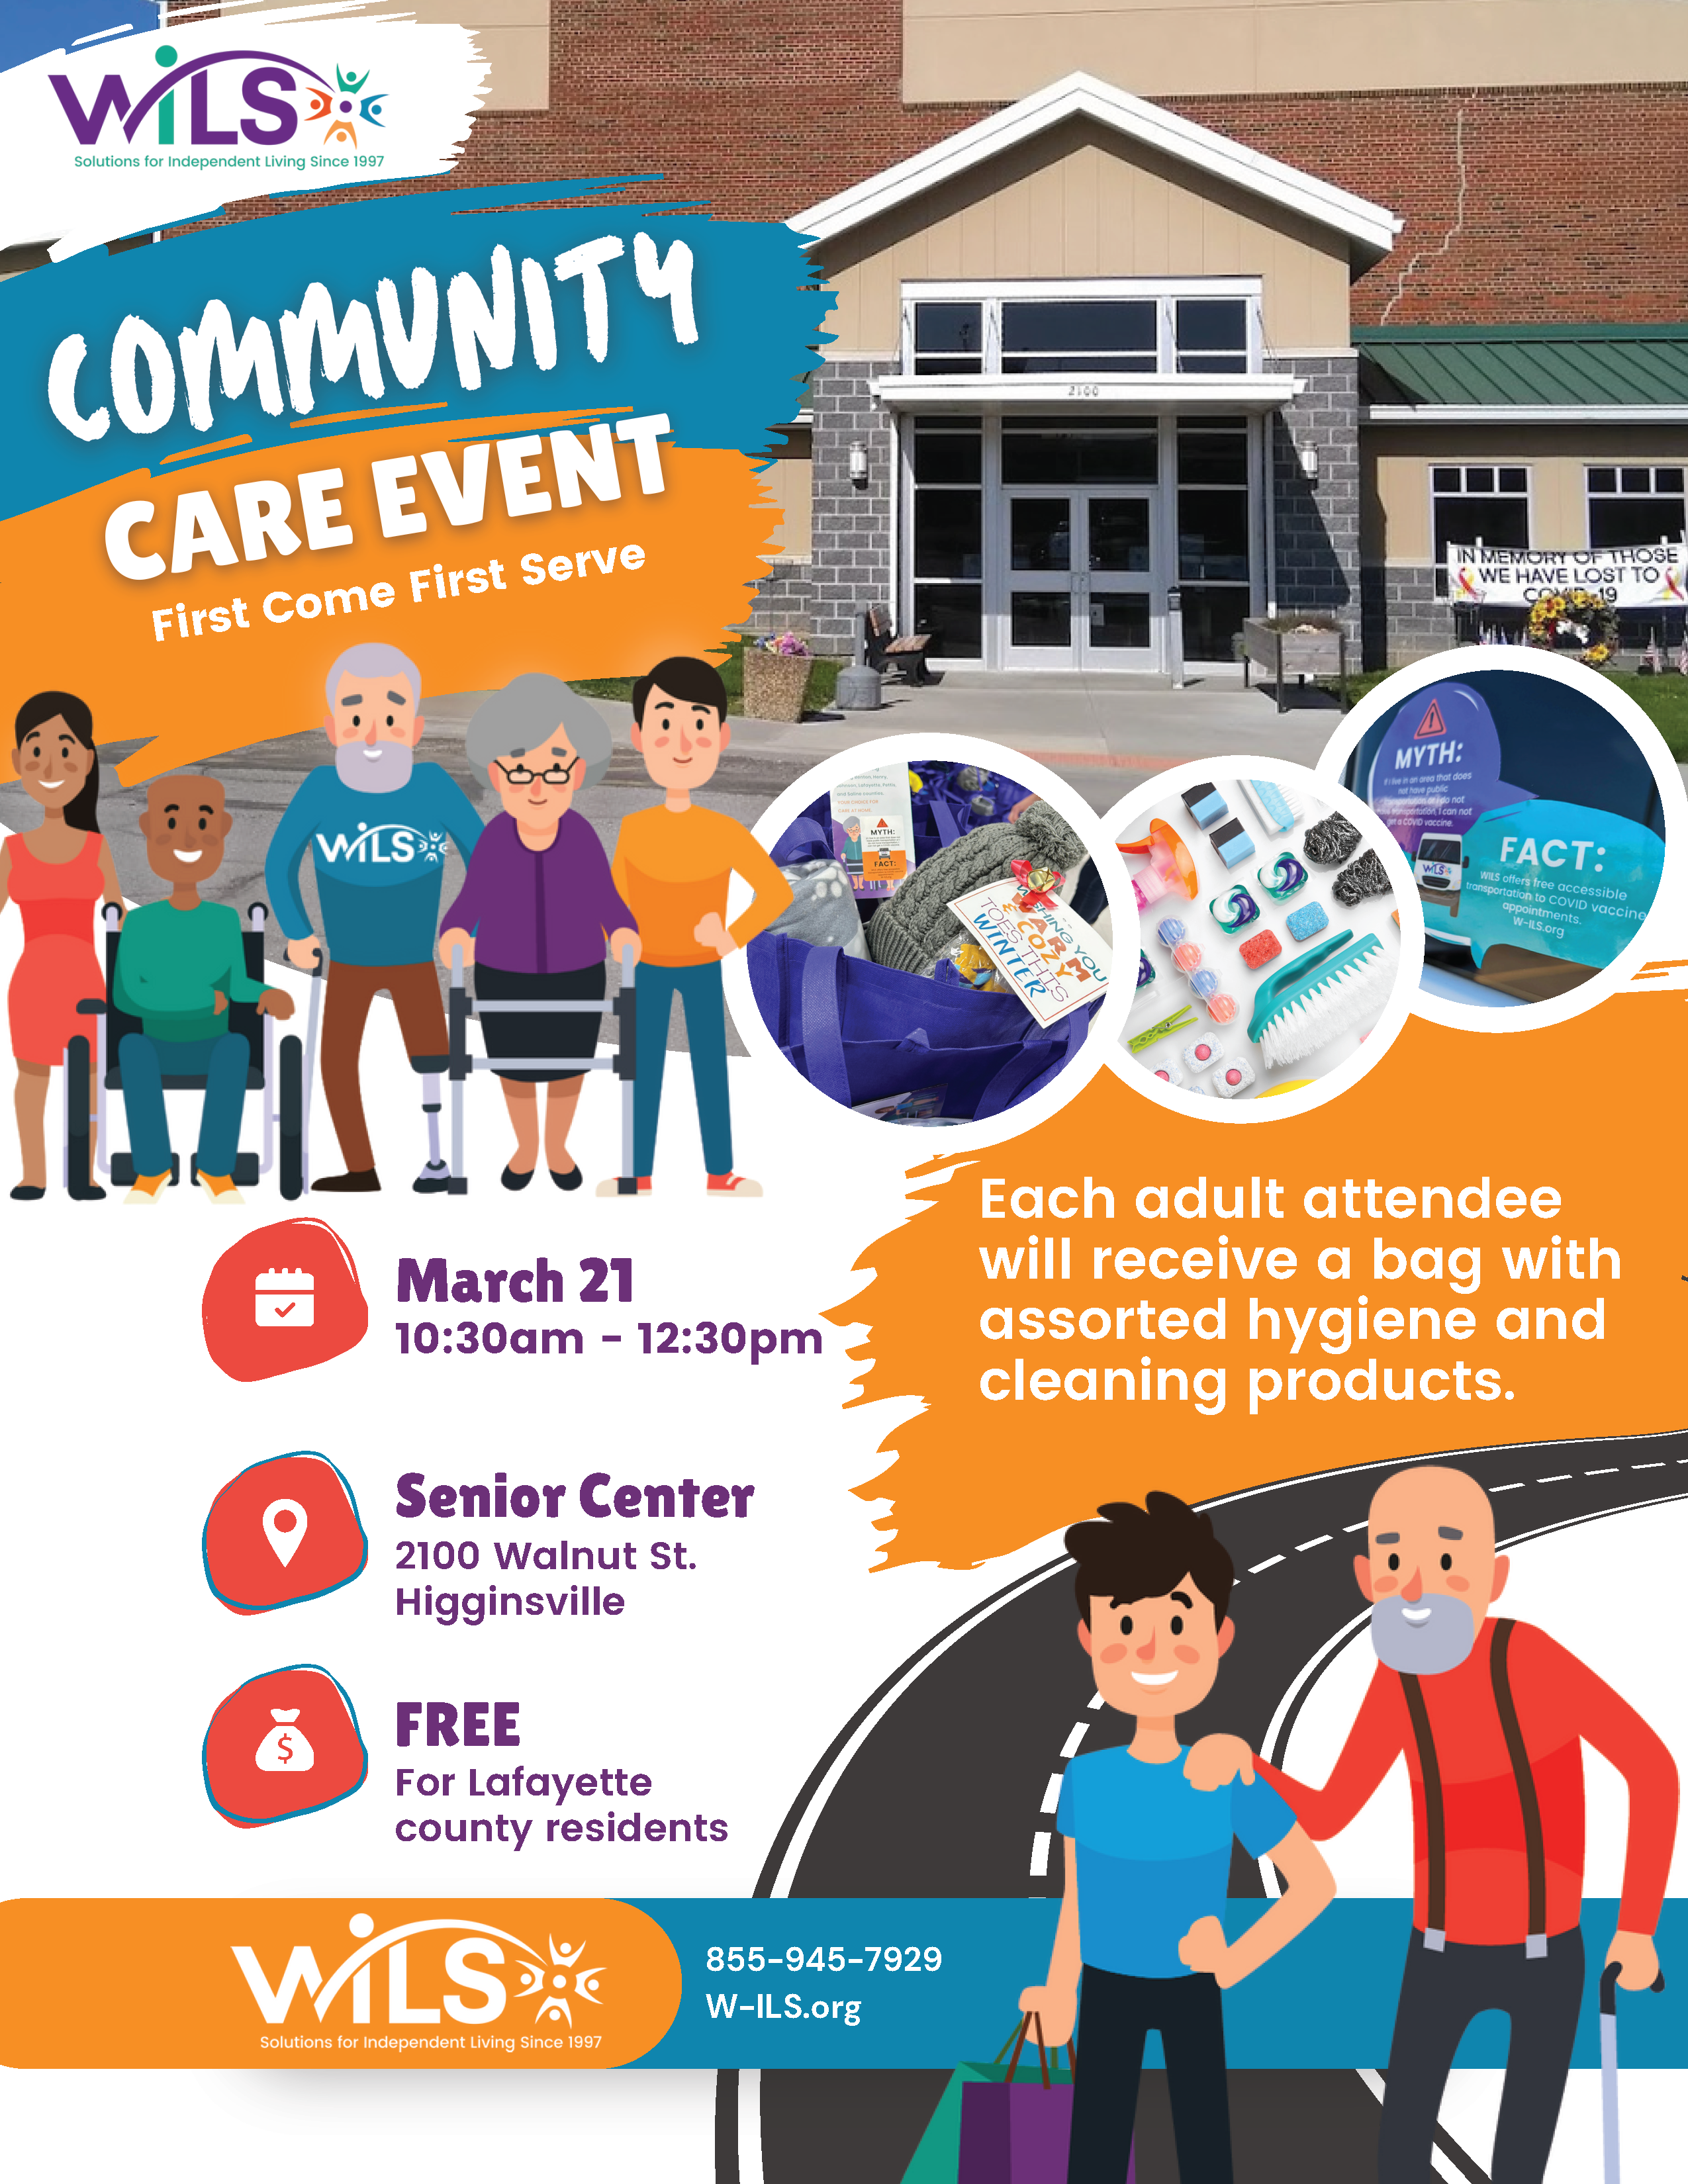 March 21
Senior Center
FREE
10:30am - 12:30pm
2100 Walnut St. Higginsville
For Lafayette county residents